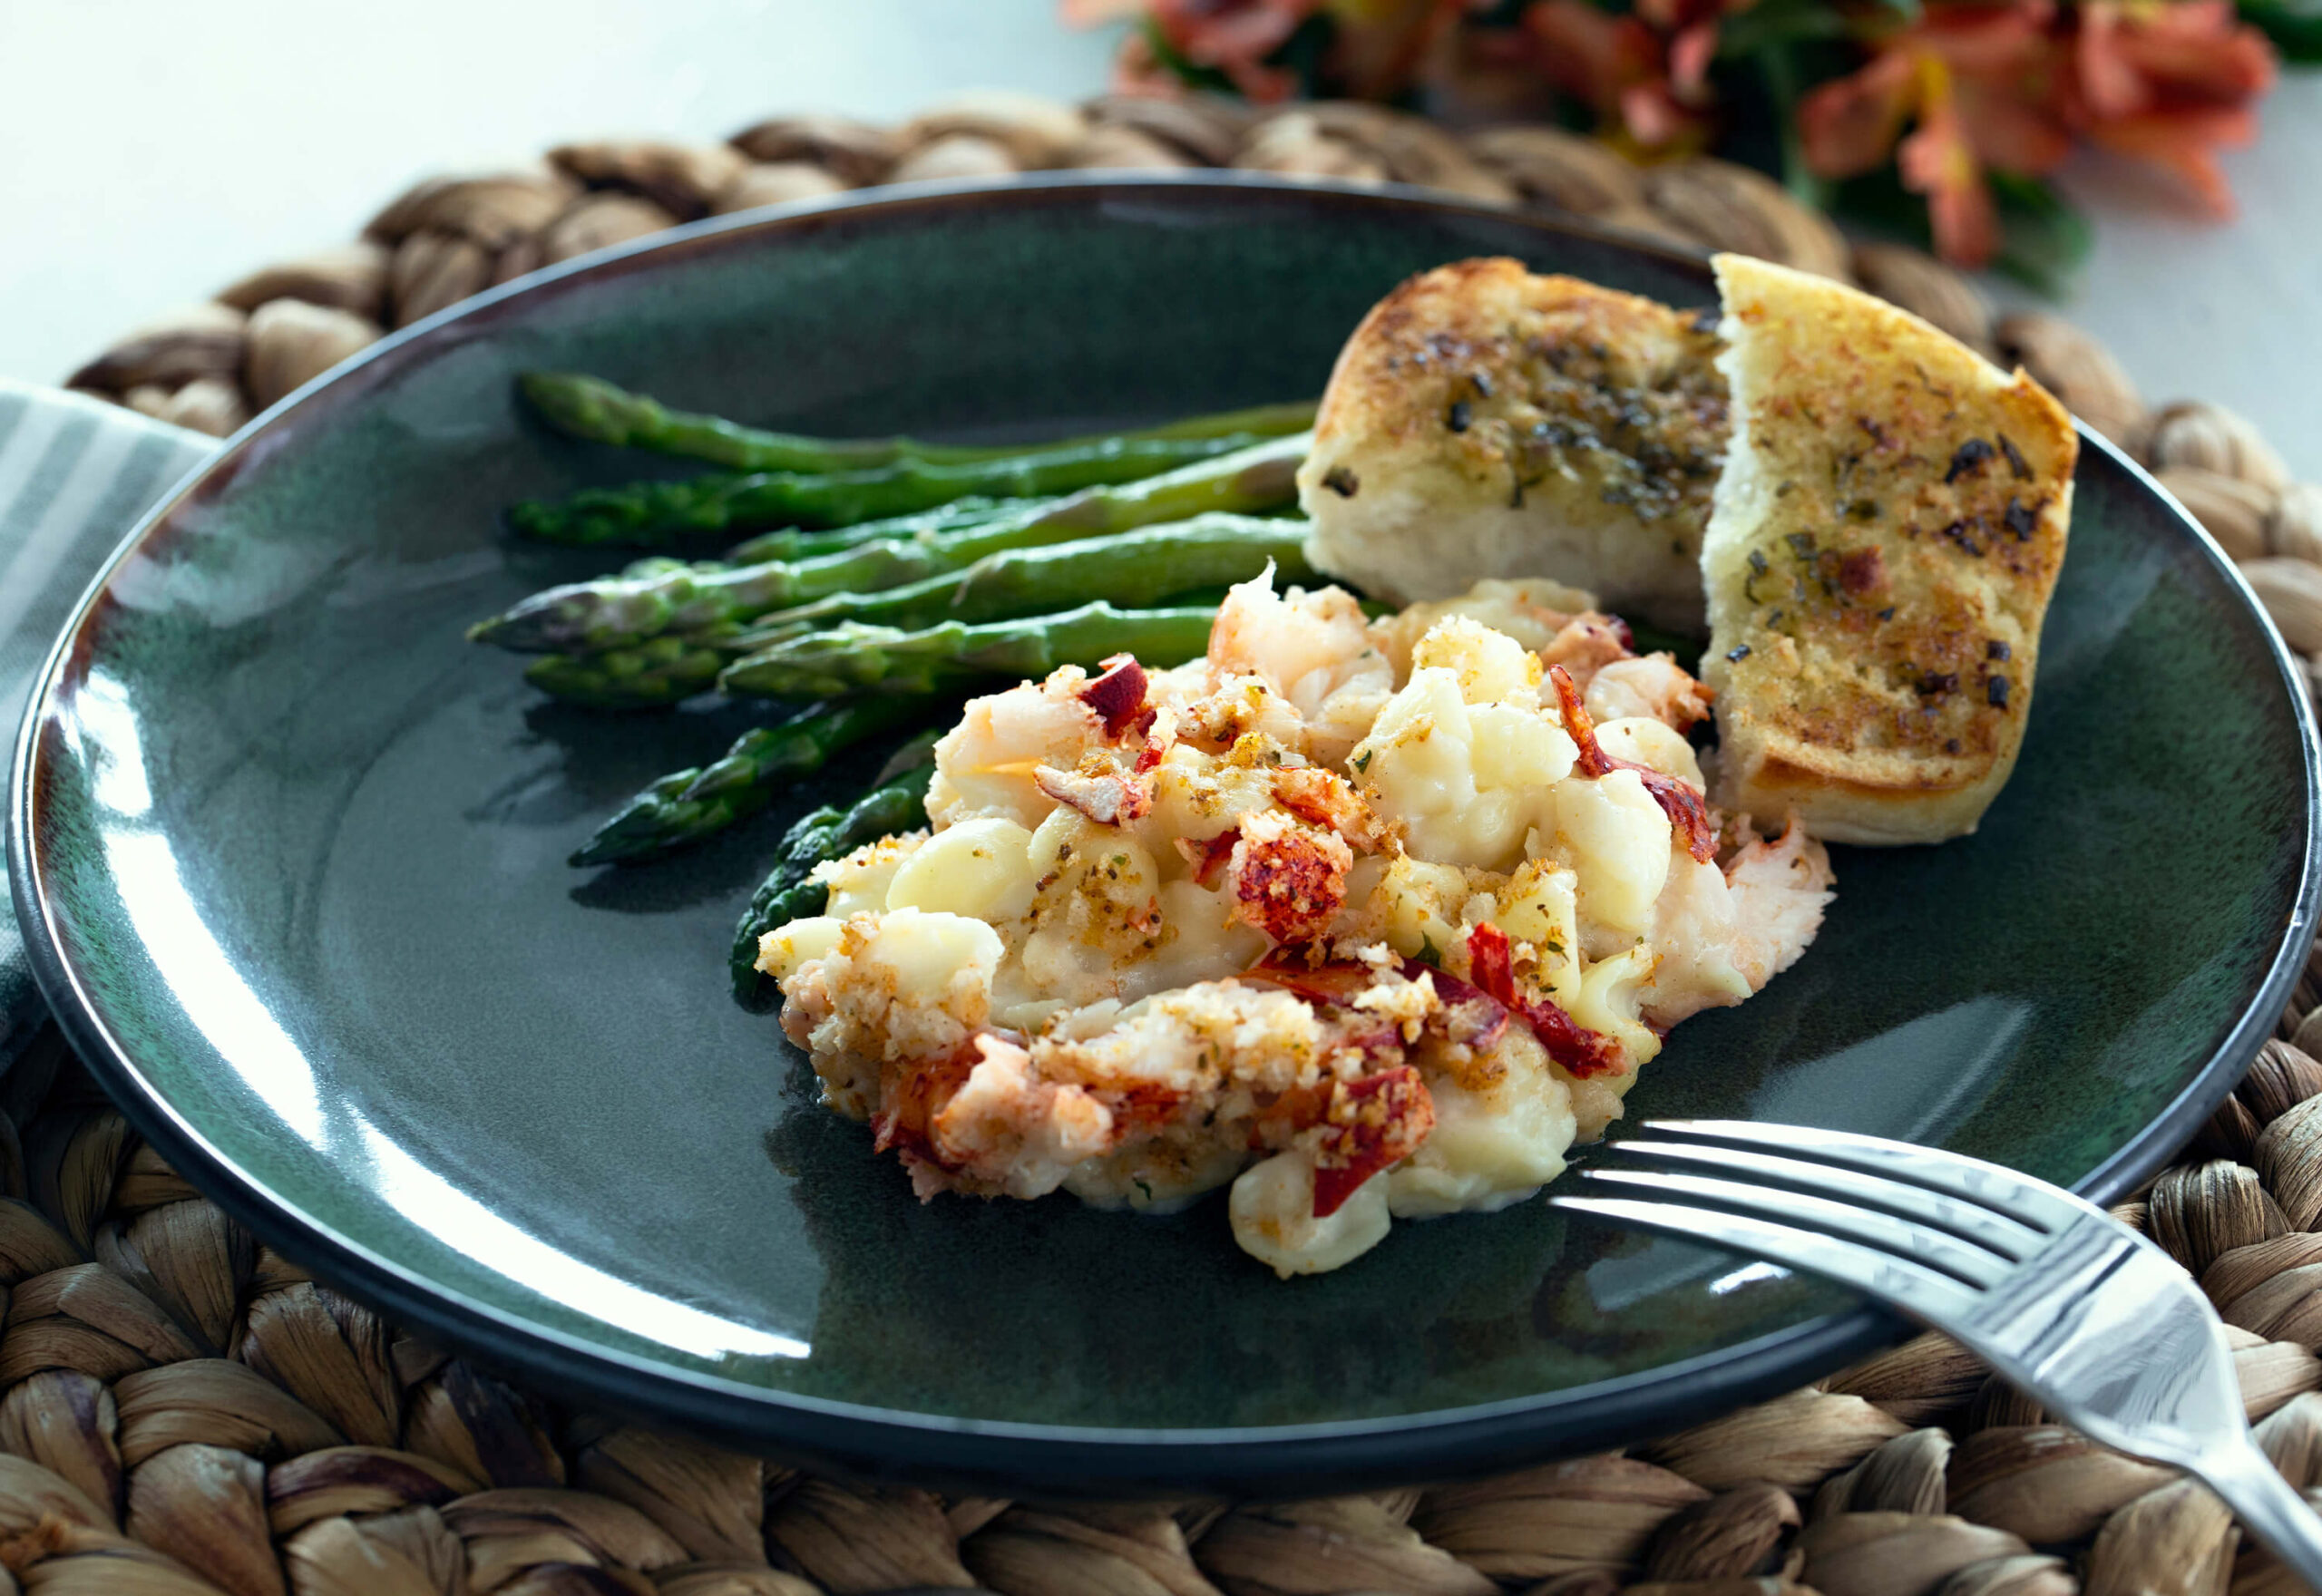 What’s for Dinner? Lobster Mac and Cheese